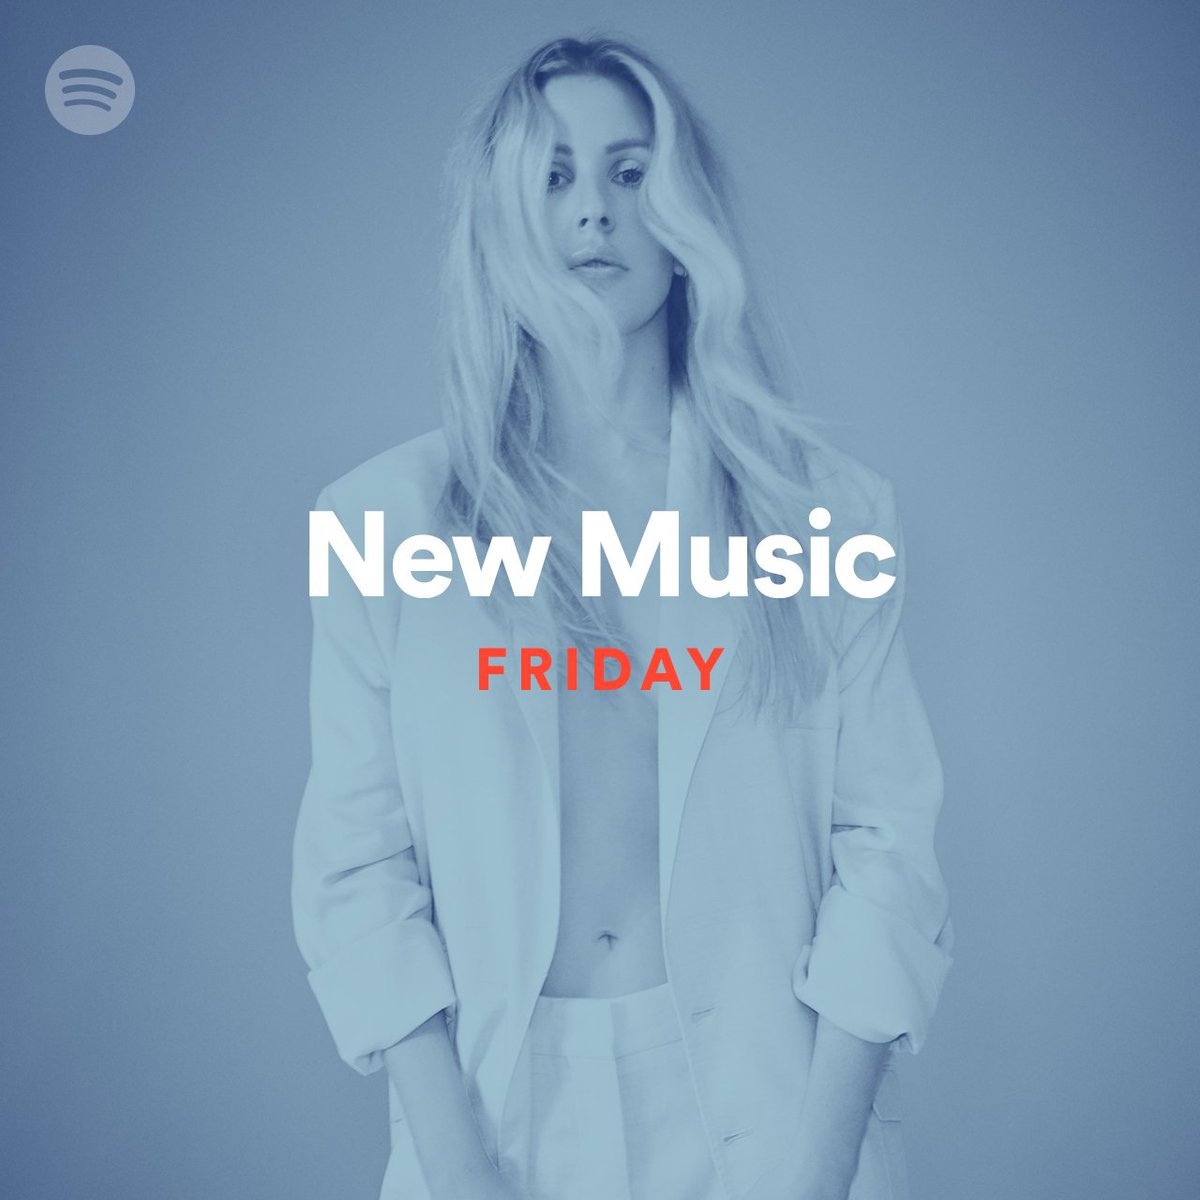 RT @SpotifyUK: Celebrate two days of freedom with #NewMusicFriday and @elliegoulding https://t.co/slrbZxqS0I https://t.co/UfefmcFR4C